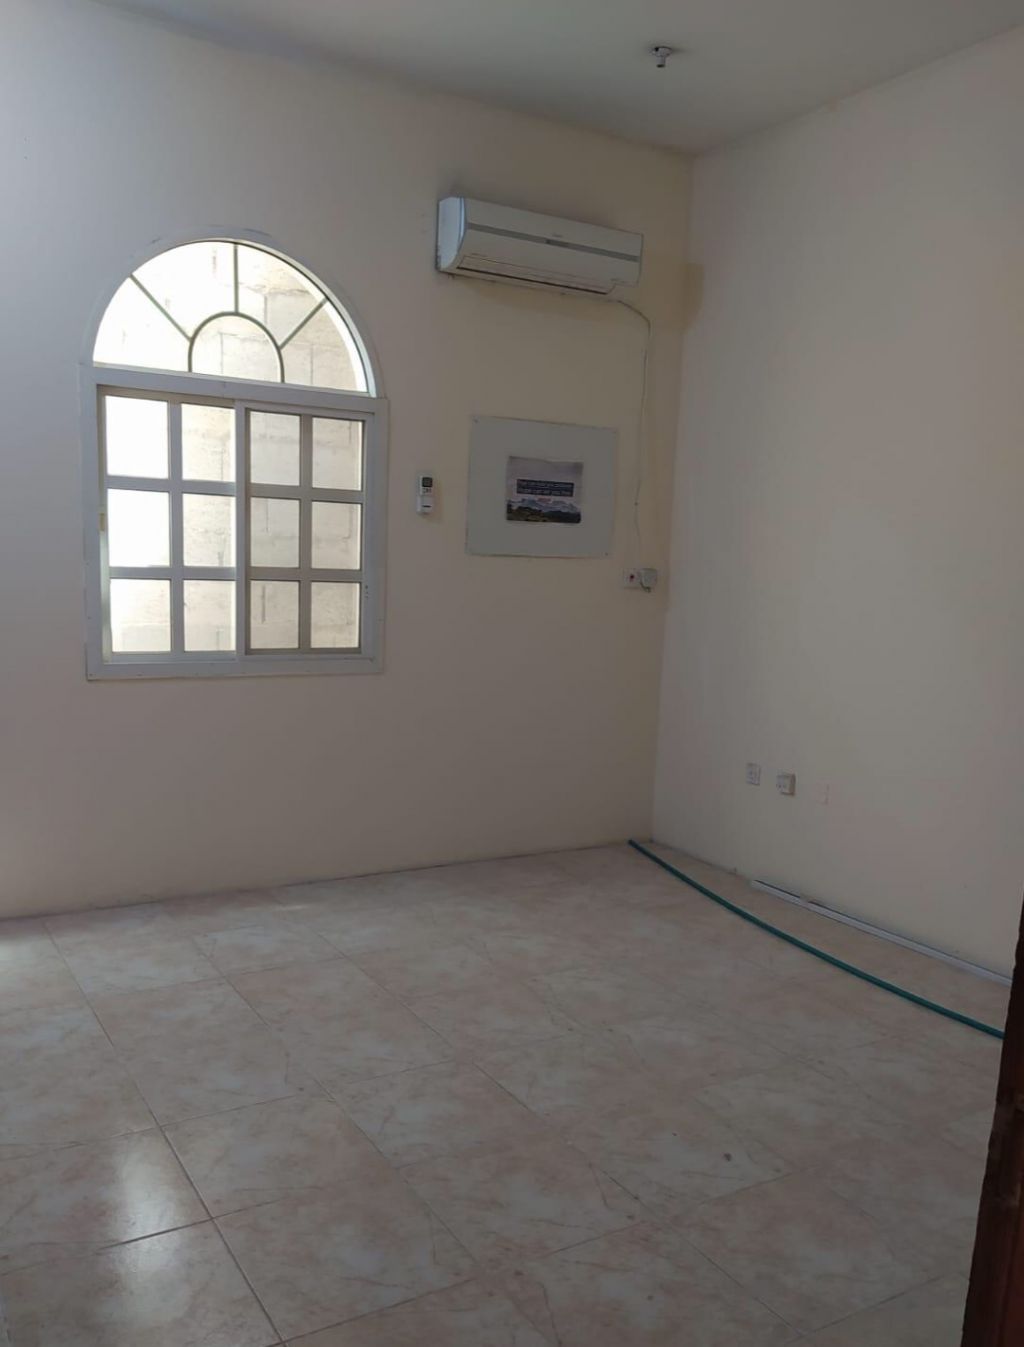 Residential Property Studio U/F Apartment  for rent in Doha-Qatar #18000 - 1  image 